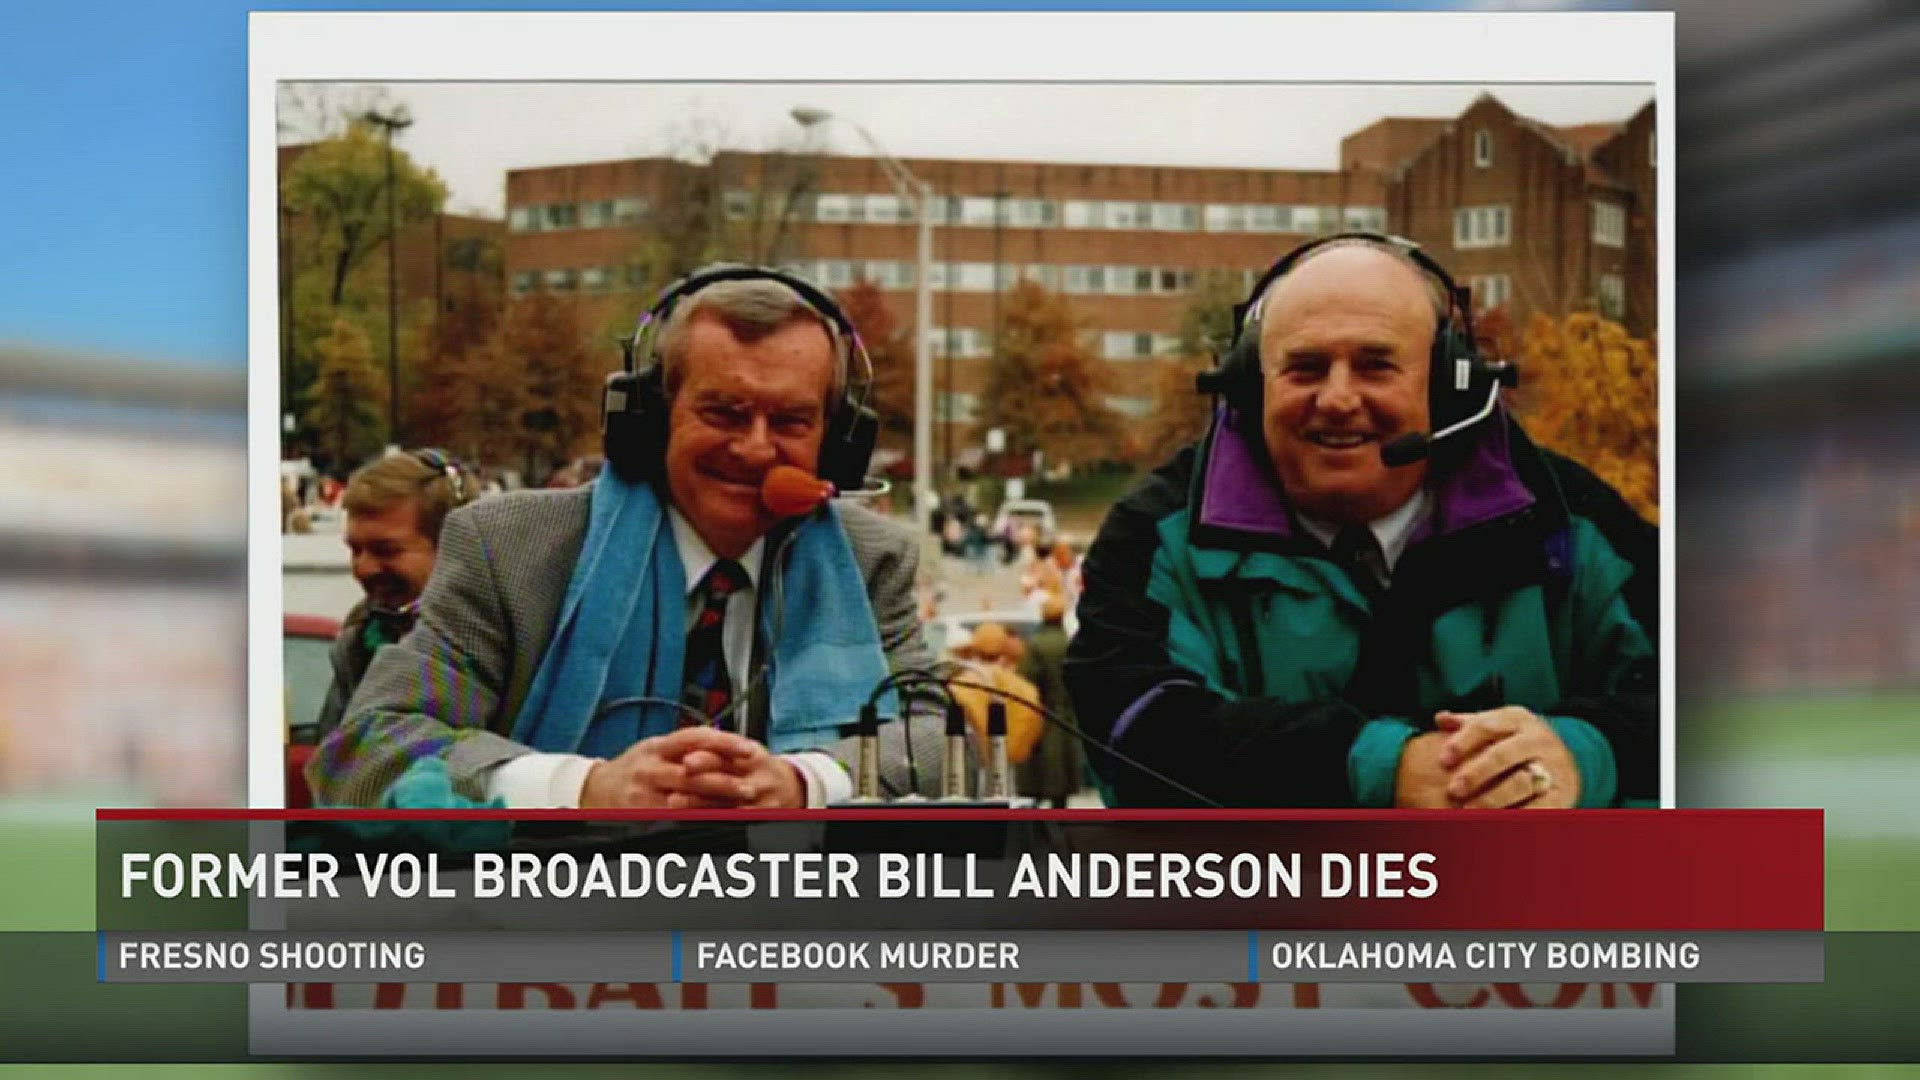 Former Tennessee and NFL football player, and John Ward's partner on Vol Network broadcasts, Bill Anderson died early Tuesday morning at age 80.